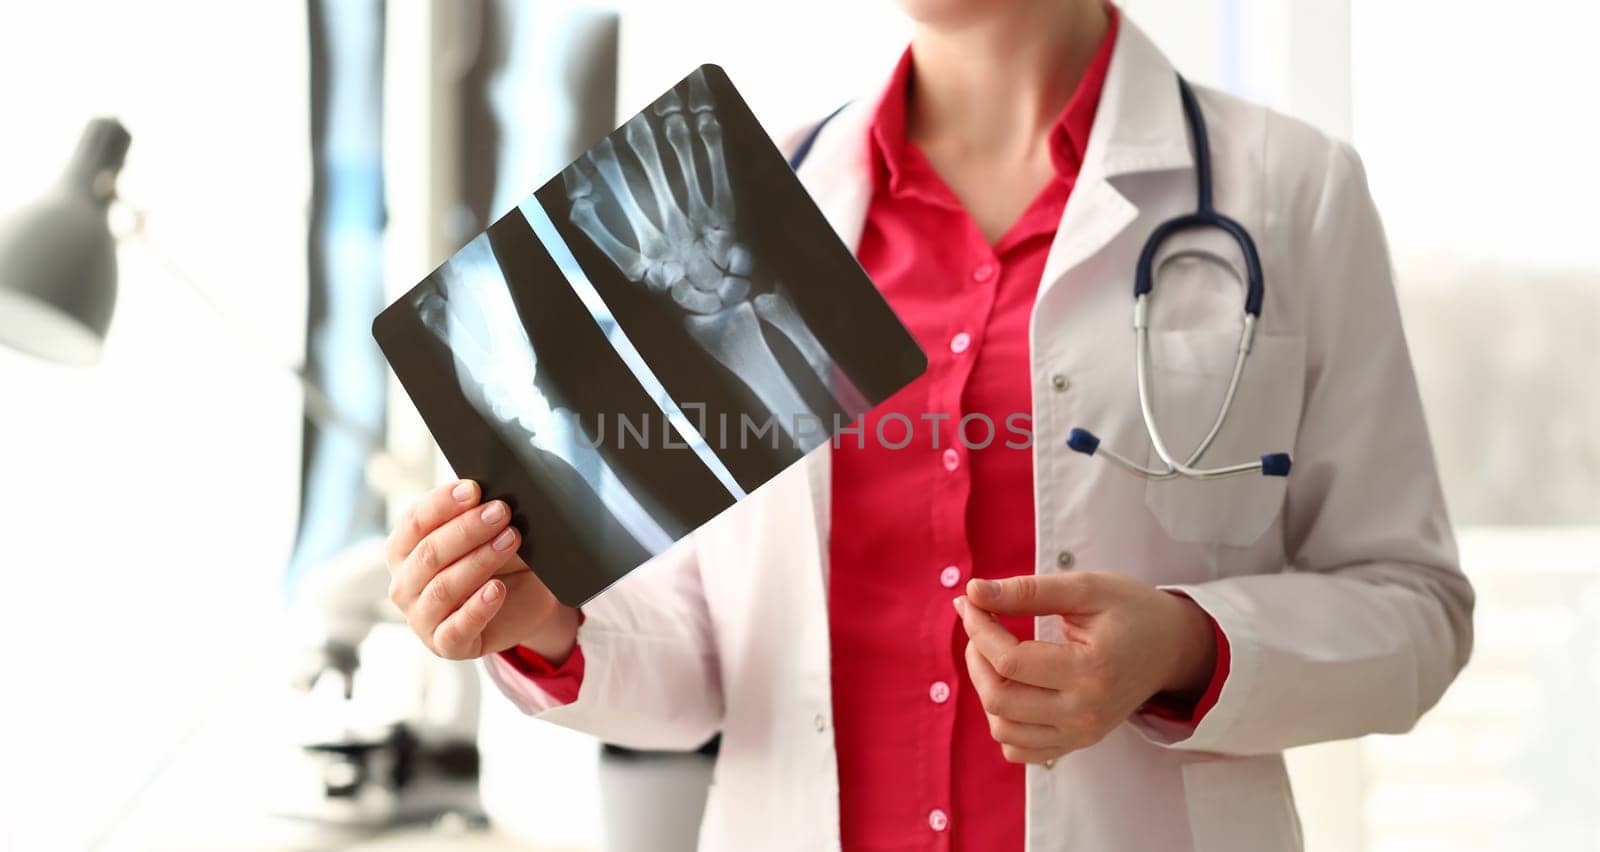 Woman Doctor Holding Right Hand Bone X-ray Image. Female Medic with Stethoscope Examining Photo Scan. Medicine Specialist Analyzing Diagnosis. Doc Physician Standing in White Lab Coat at Hospital